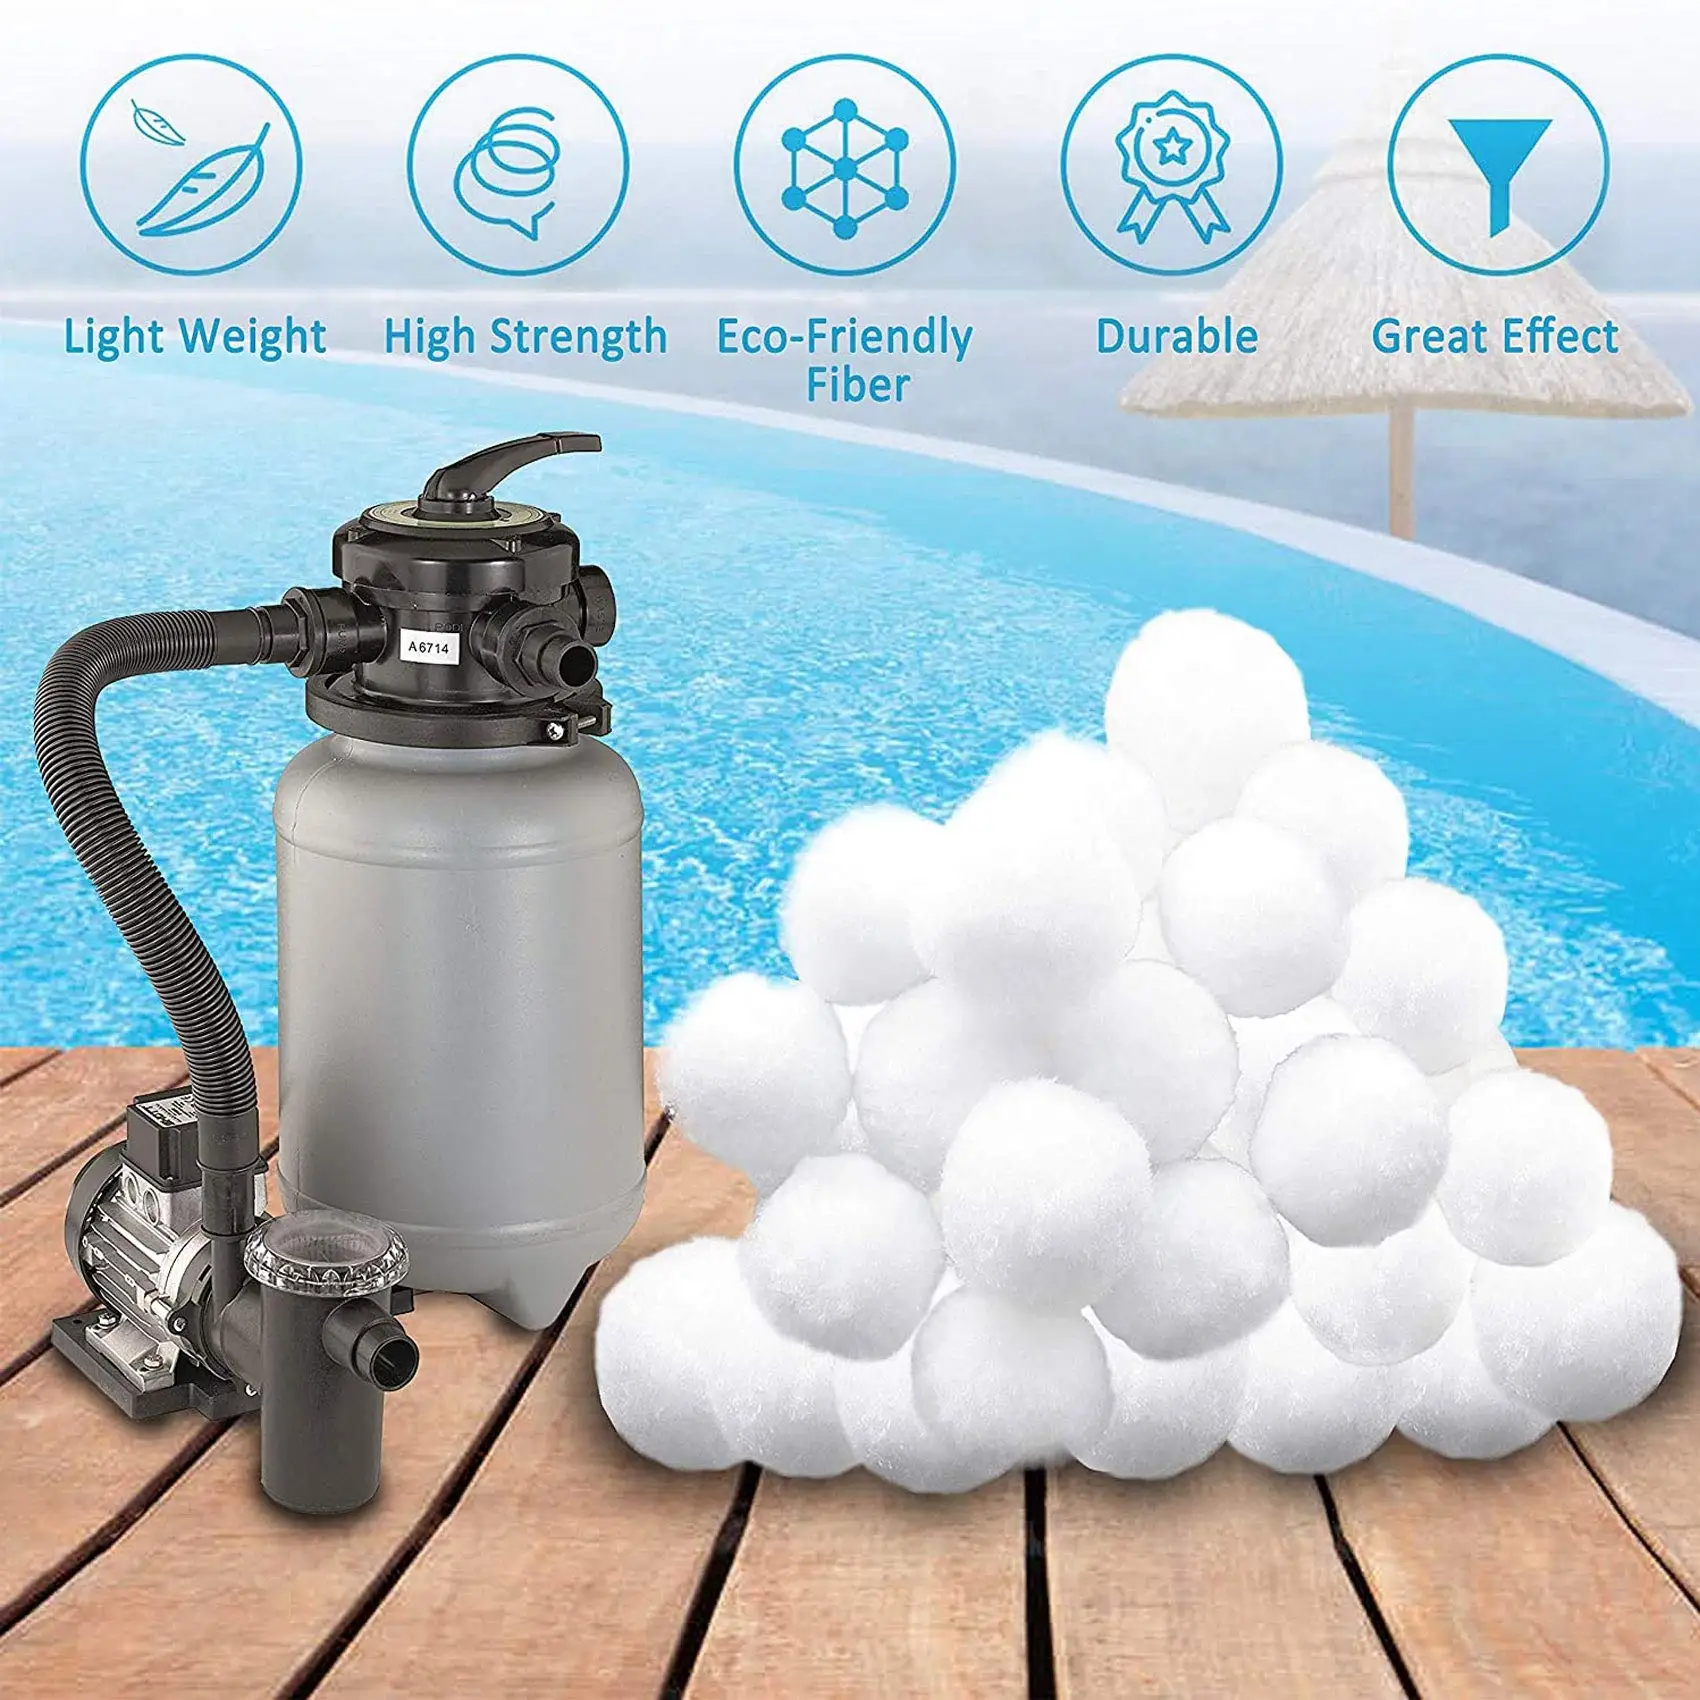 Does Using Filter Balls Keep Your Pool Sparkling Clean: The 10 Best Ways To Maintain Your Pool